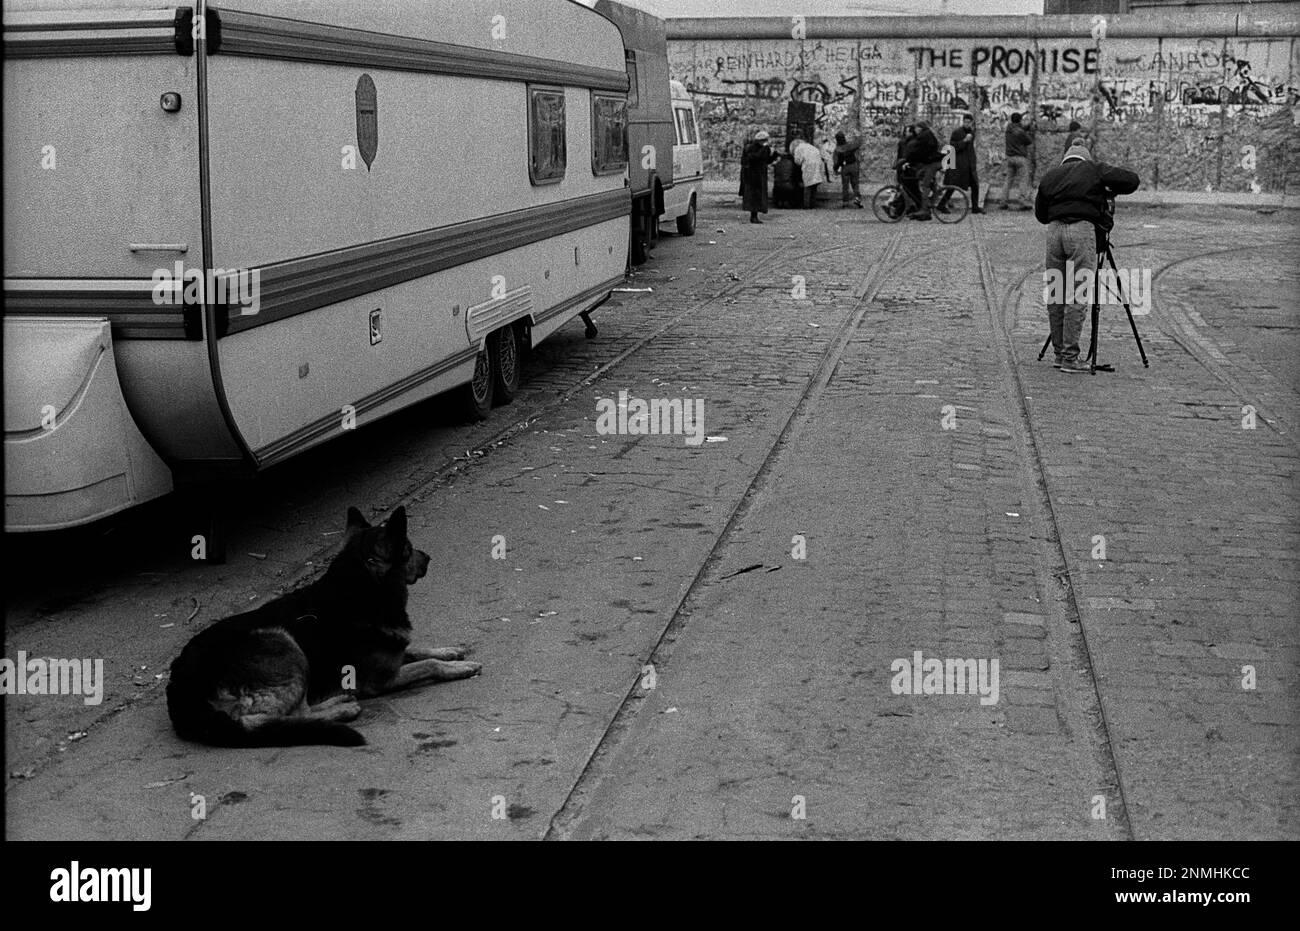 West Berlin, 01.01.1990, at the Wall at Potsdamer Platz, FotoGraf and a dog, The Promise Stock Photo